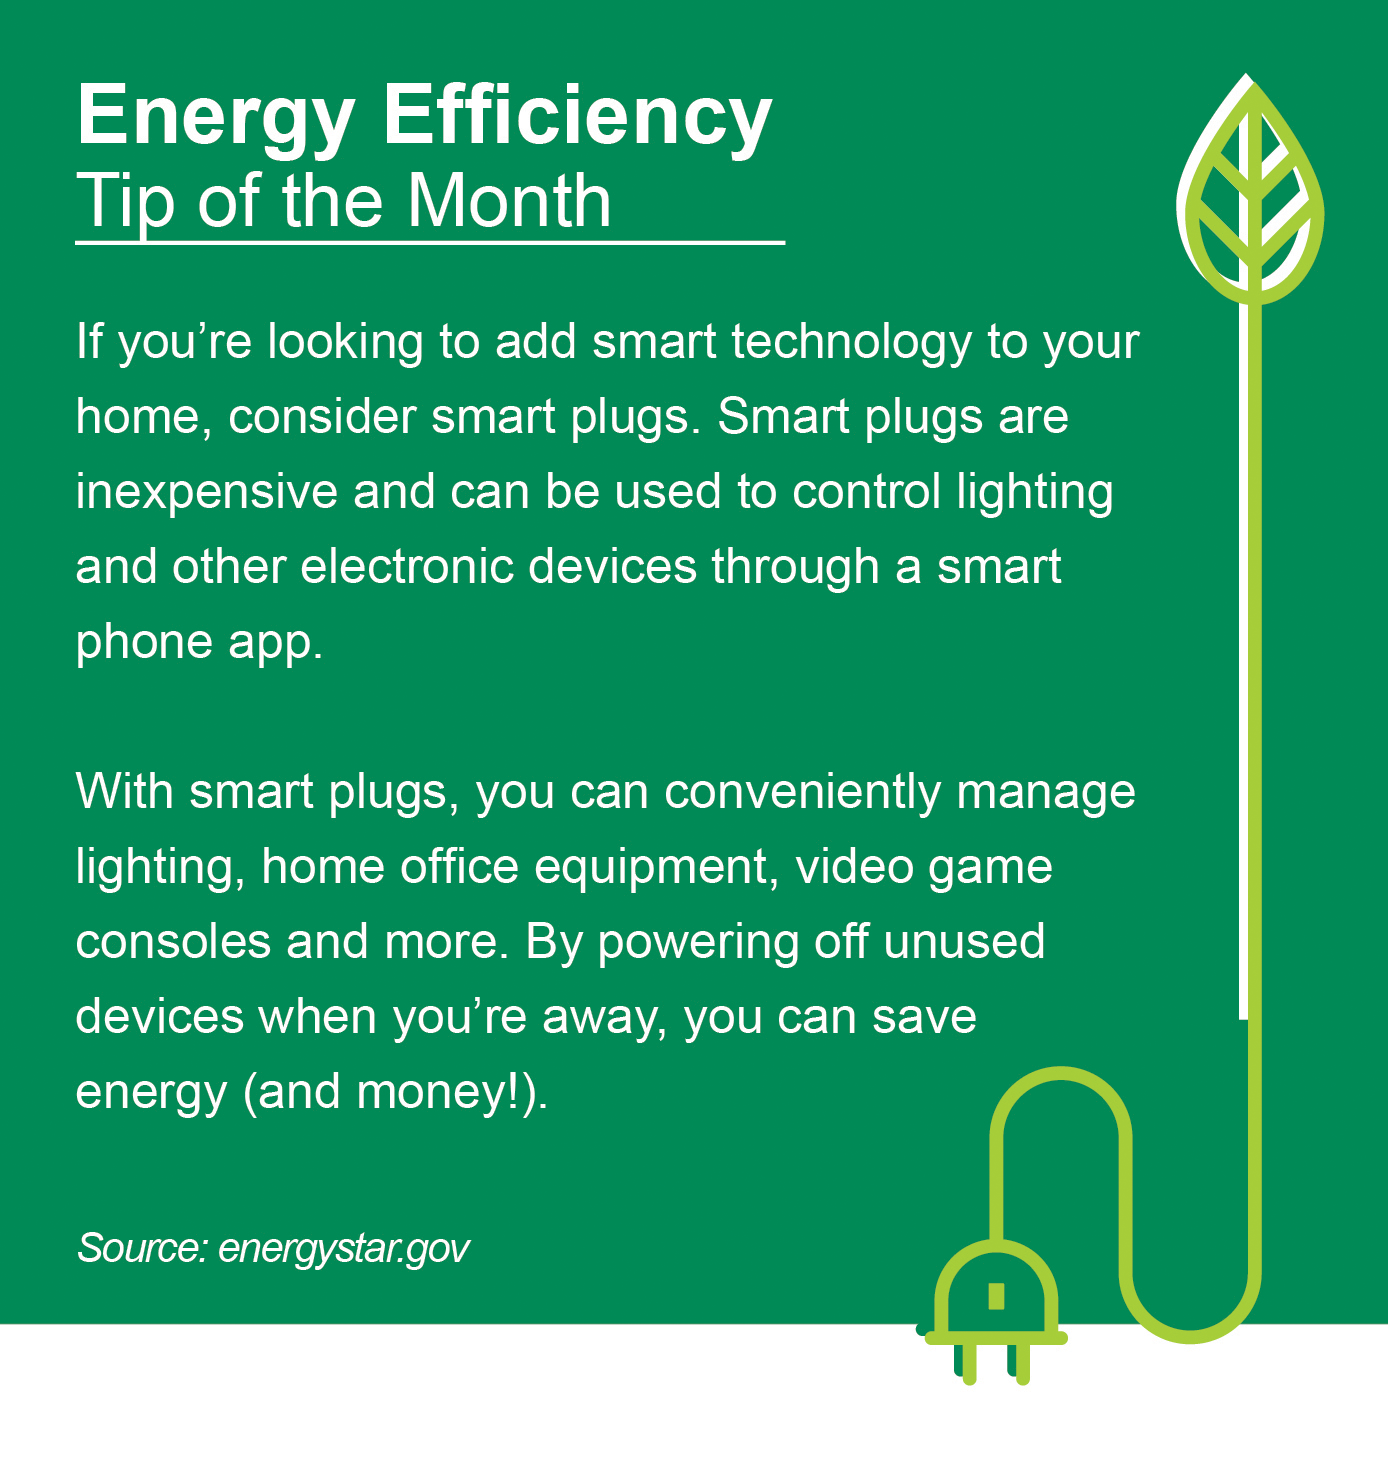 Energy Efficiency Tip of the Month: If you're looking to add smart technology to your home, consider smart plugs. Smart plugs are inexpensive and can be used to control lighting and other electronic devices through a smart phone app. With smart plugs, you can conveniently manage lighting, home office equipment, video game consoles and more. By powering off unused devices when you're away, you can save energy (and money!).